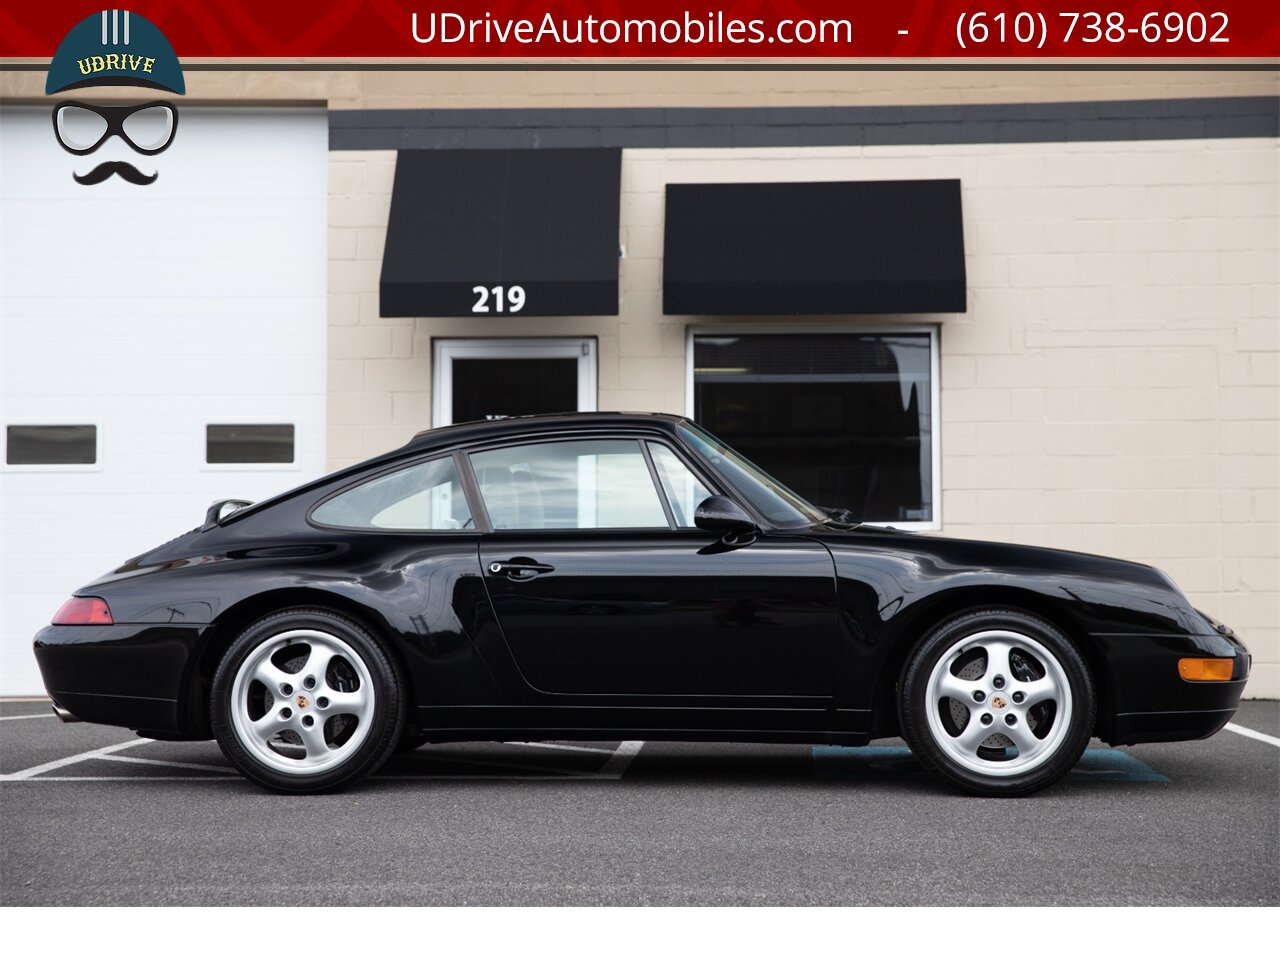 1995 Porsche 911 993 Carrera 6 Speed 16k Miles Service History  Black over Black Spectacular Stock Example 1 Owner Clean Carfax - Photo 15 - West Chester, PA 19382